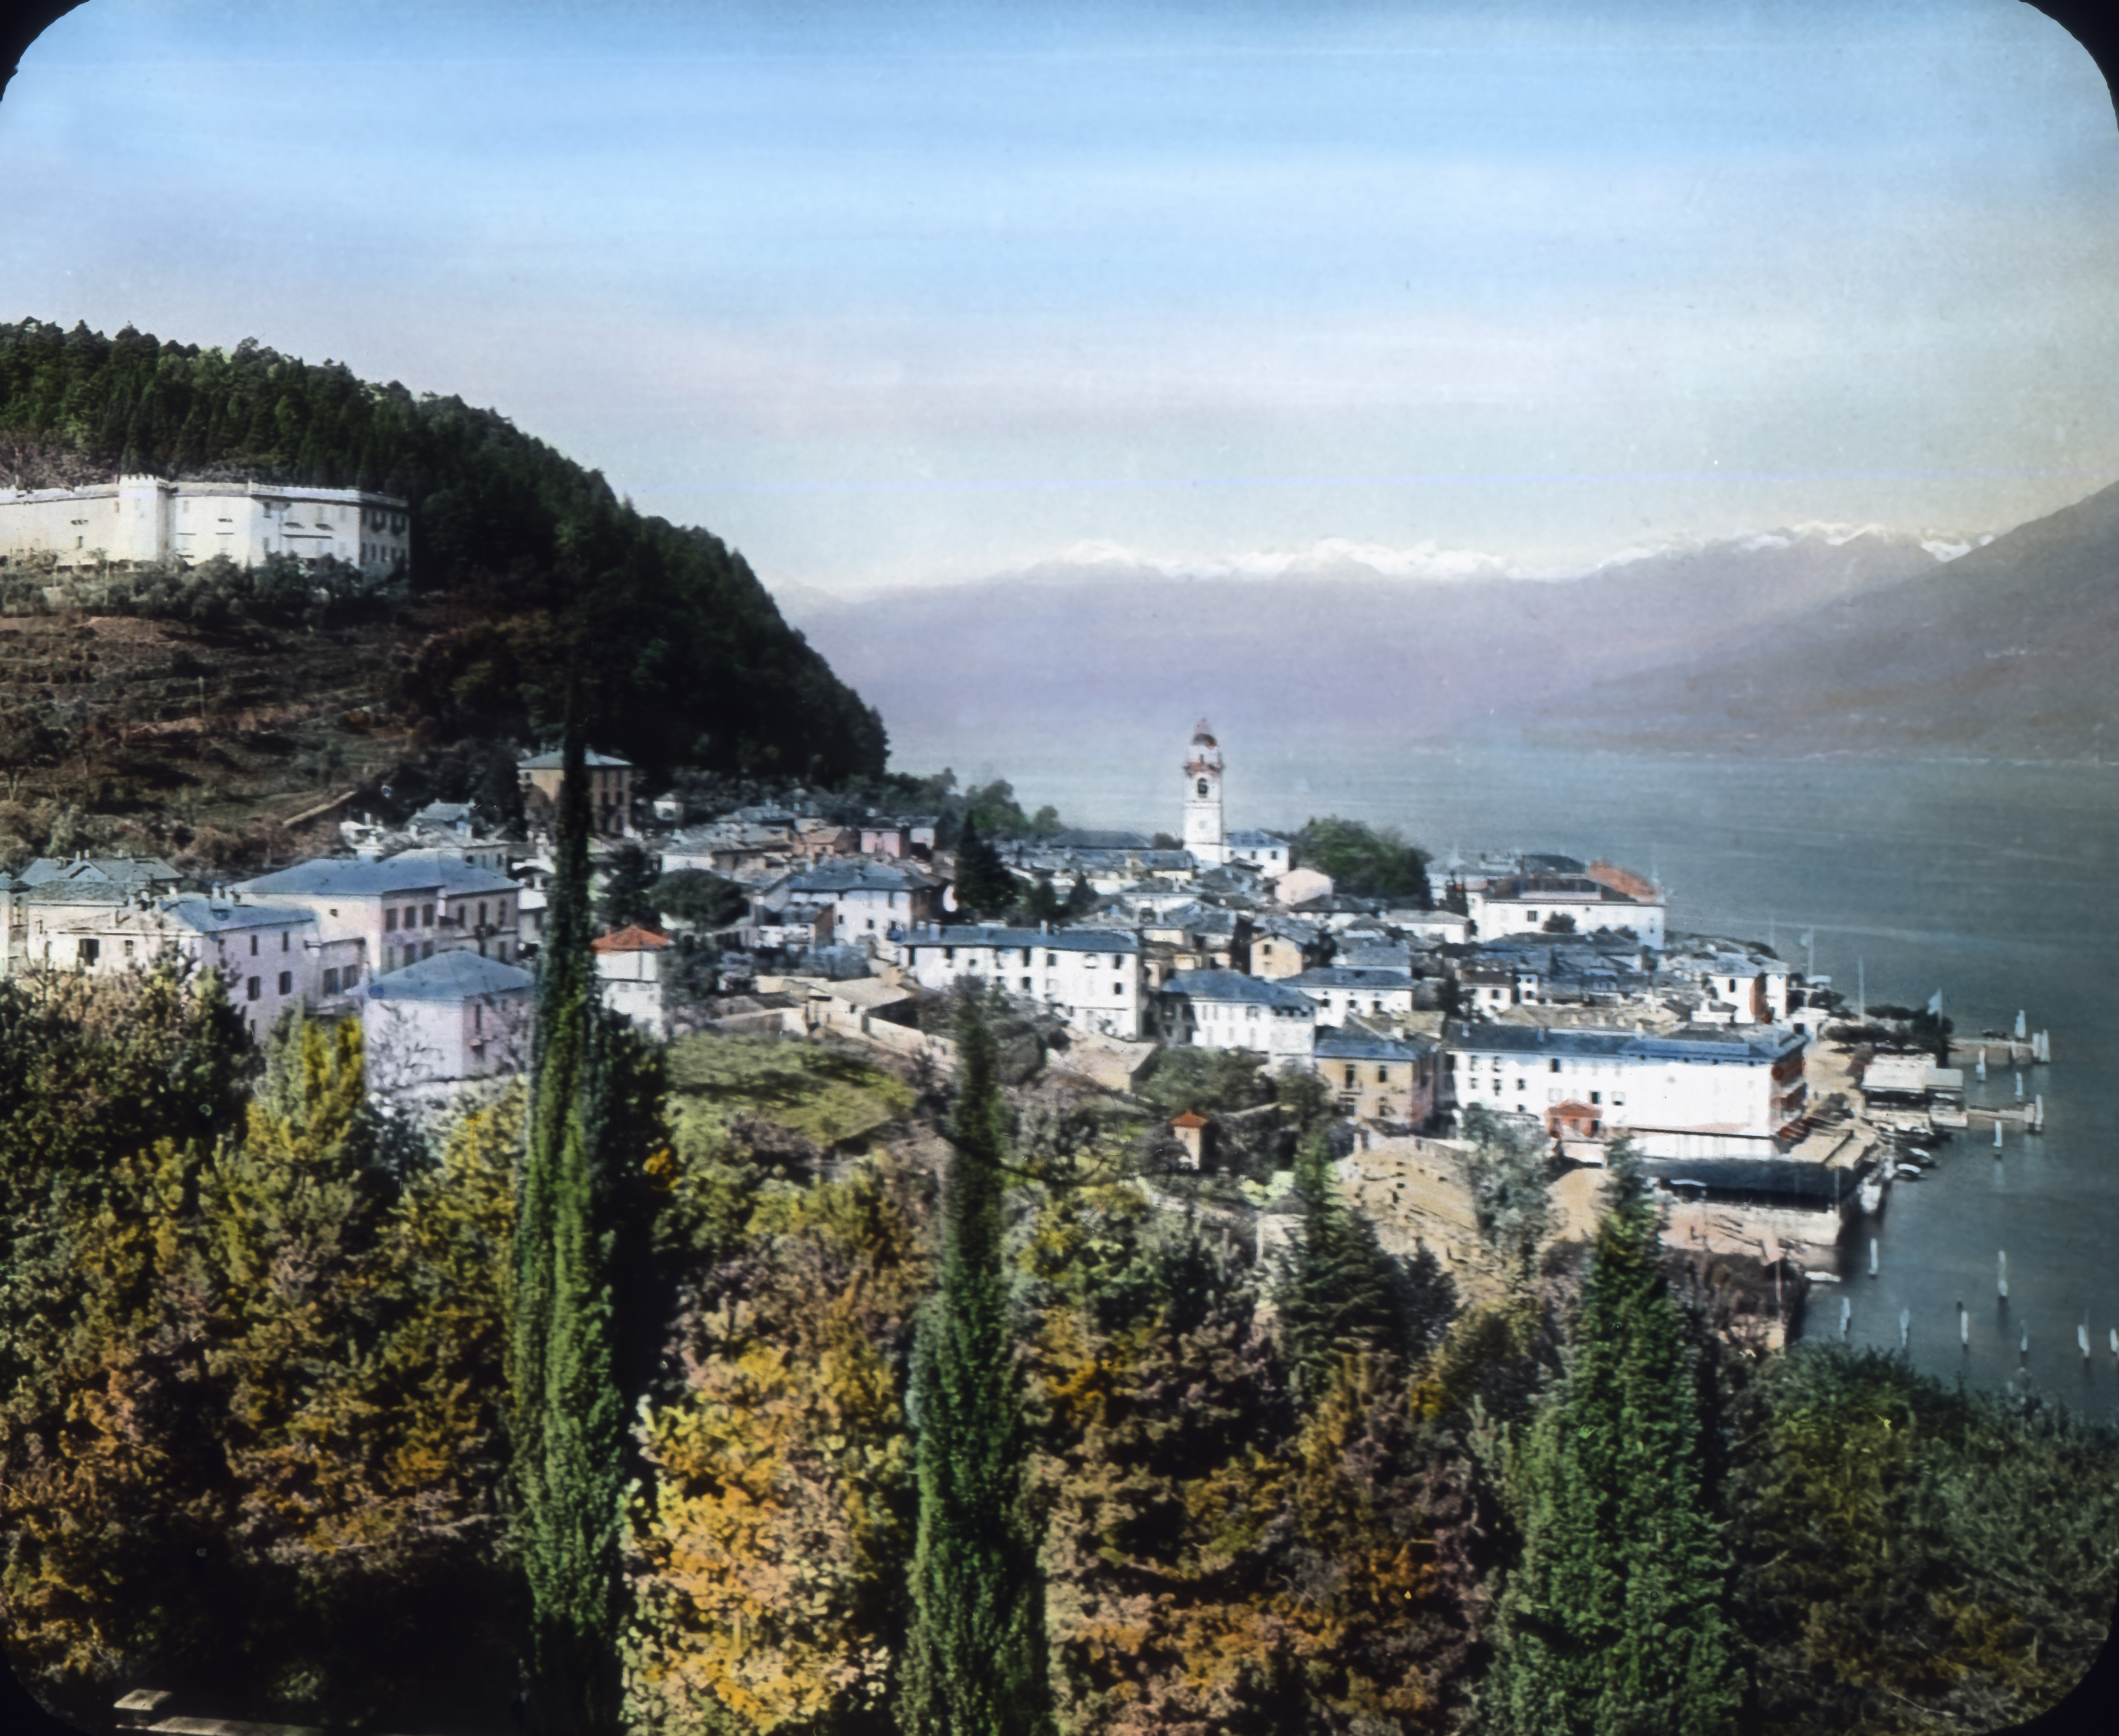 A photo of a picturesque Italian town on the shores of a lake.